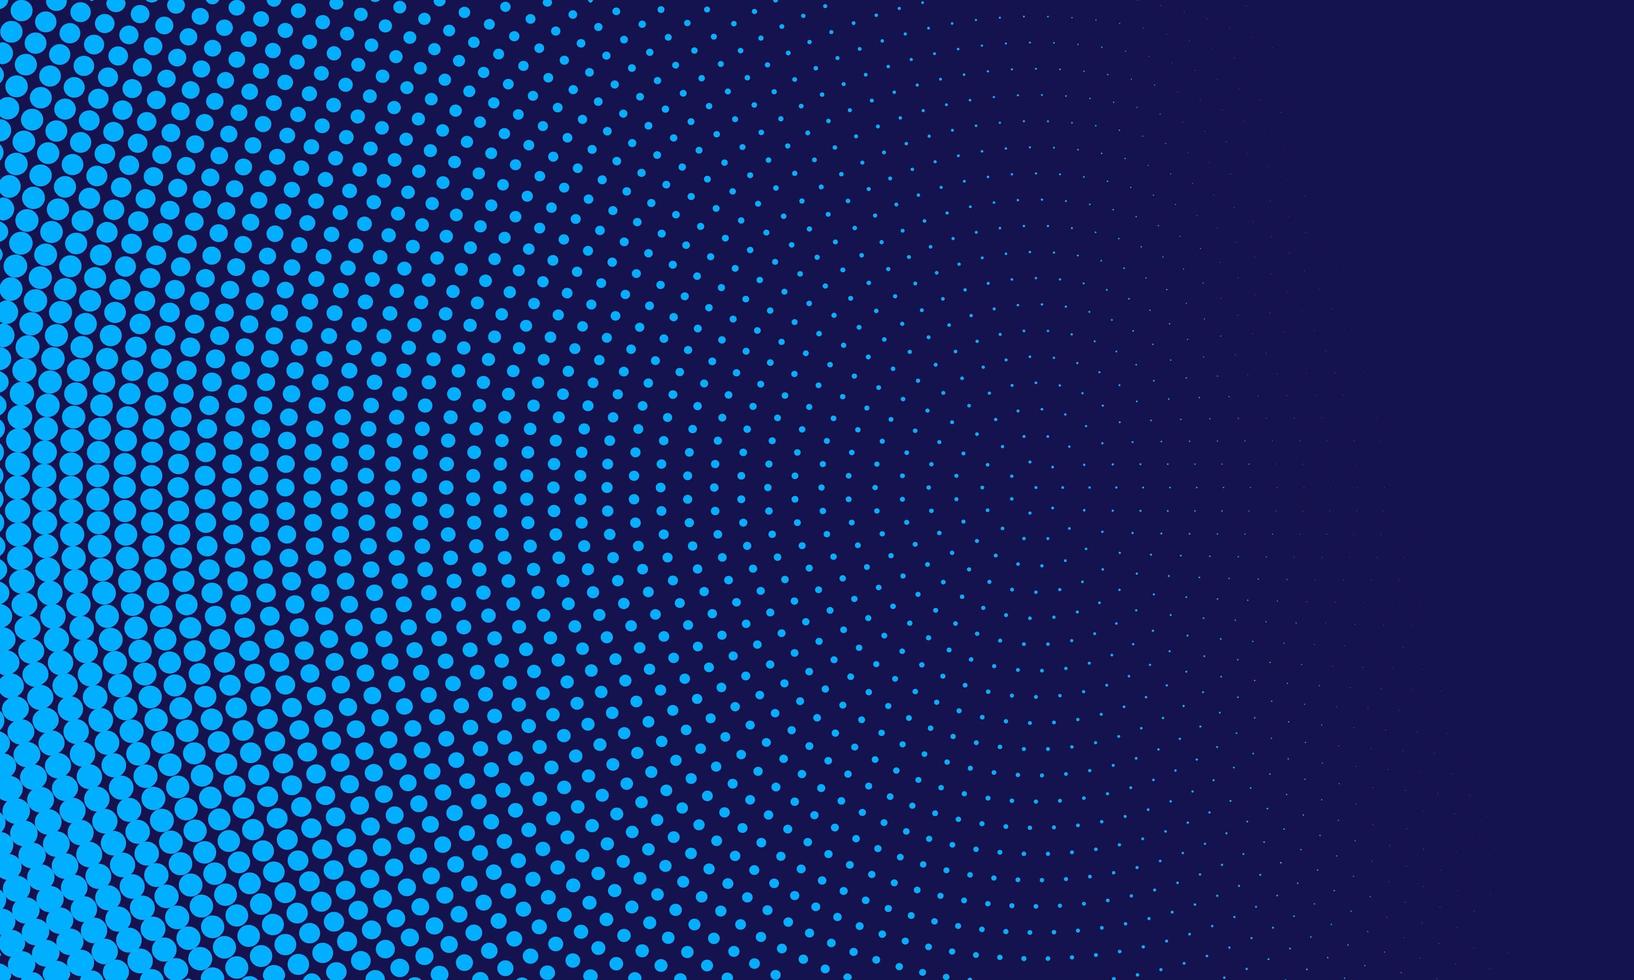 Abstract Light Blue Dots in Circle on Navy Background vector